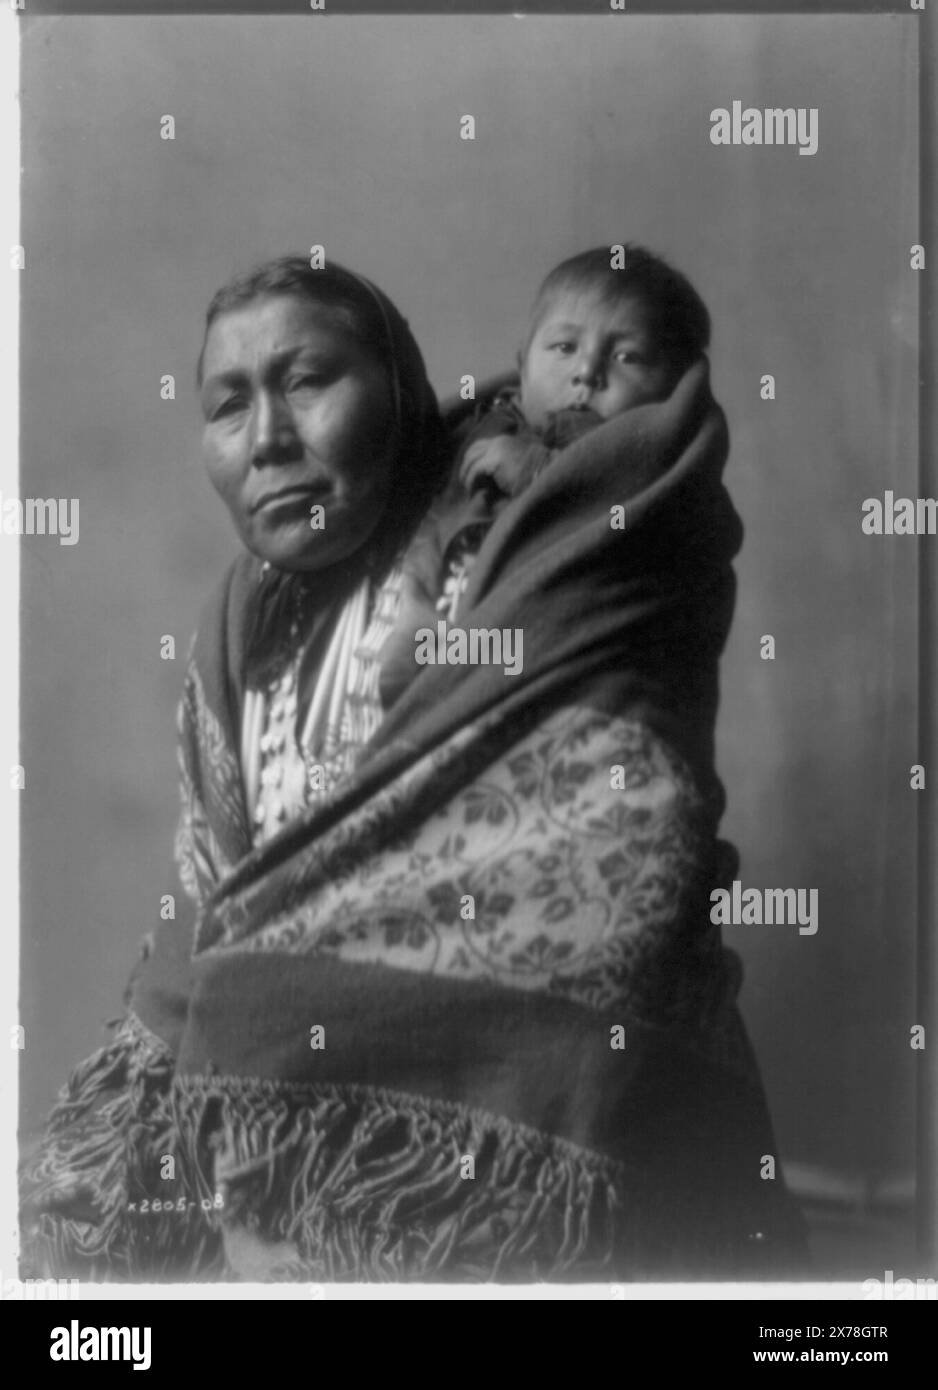 Hidatsa mother, 'Mrs. Good Bear' on verso., No. 2805-08., Published in: The North American Indian / Edward S. Curtis. [Seattle, Wash.] : Edward S. Curtis, 1907-30, suppl. v. 4, p. 142.. Indians of North America, Women, 1900-1910. , Hidatsa Indians, 1900-1910. , Mothers & children, 1900-1910. Stock Photo